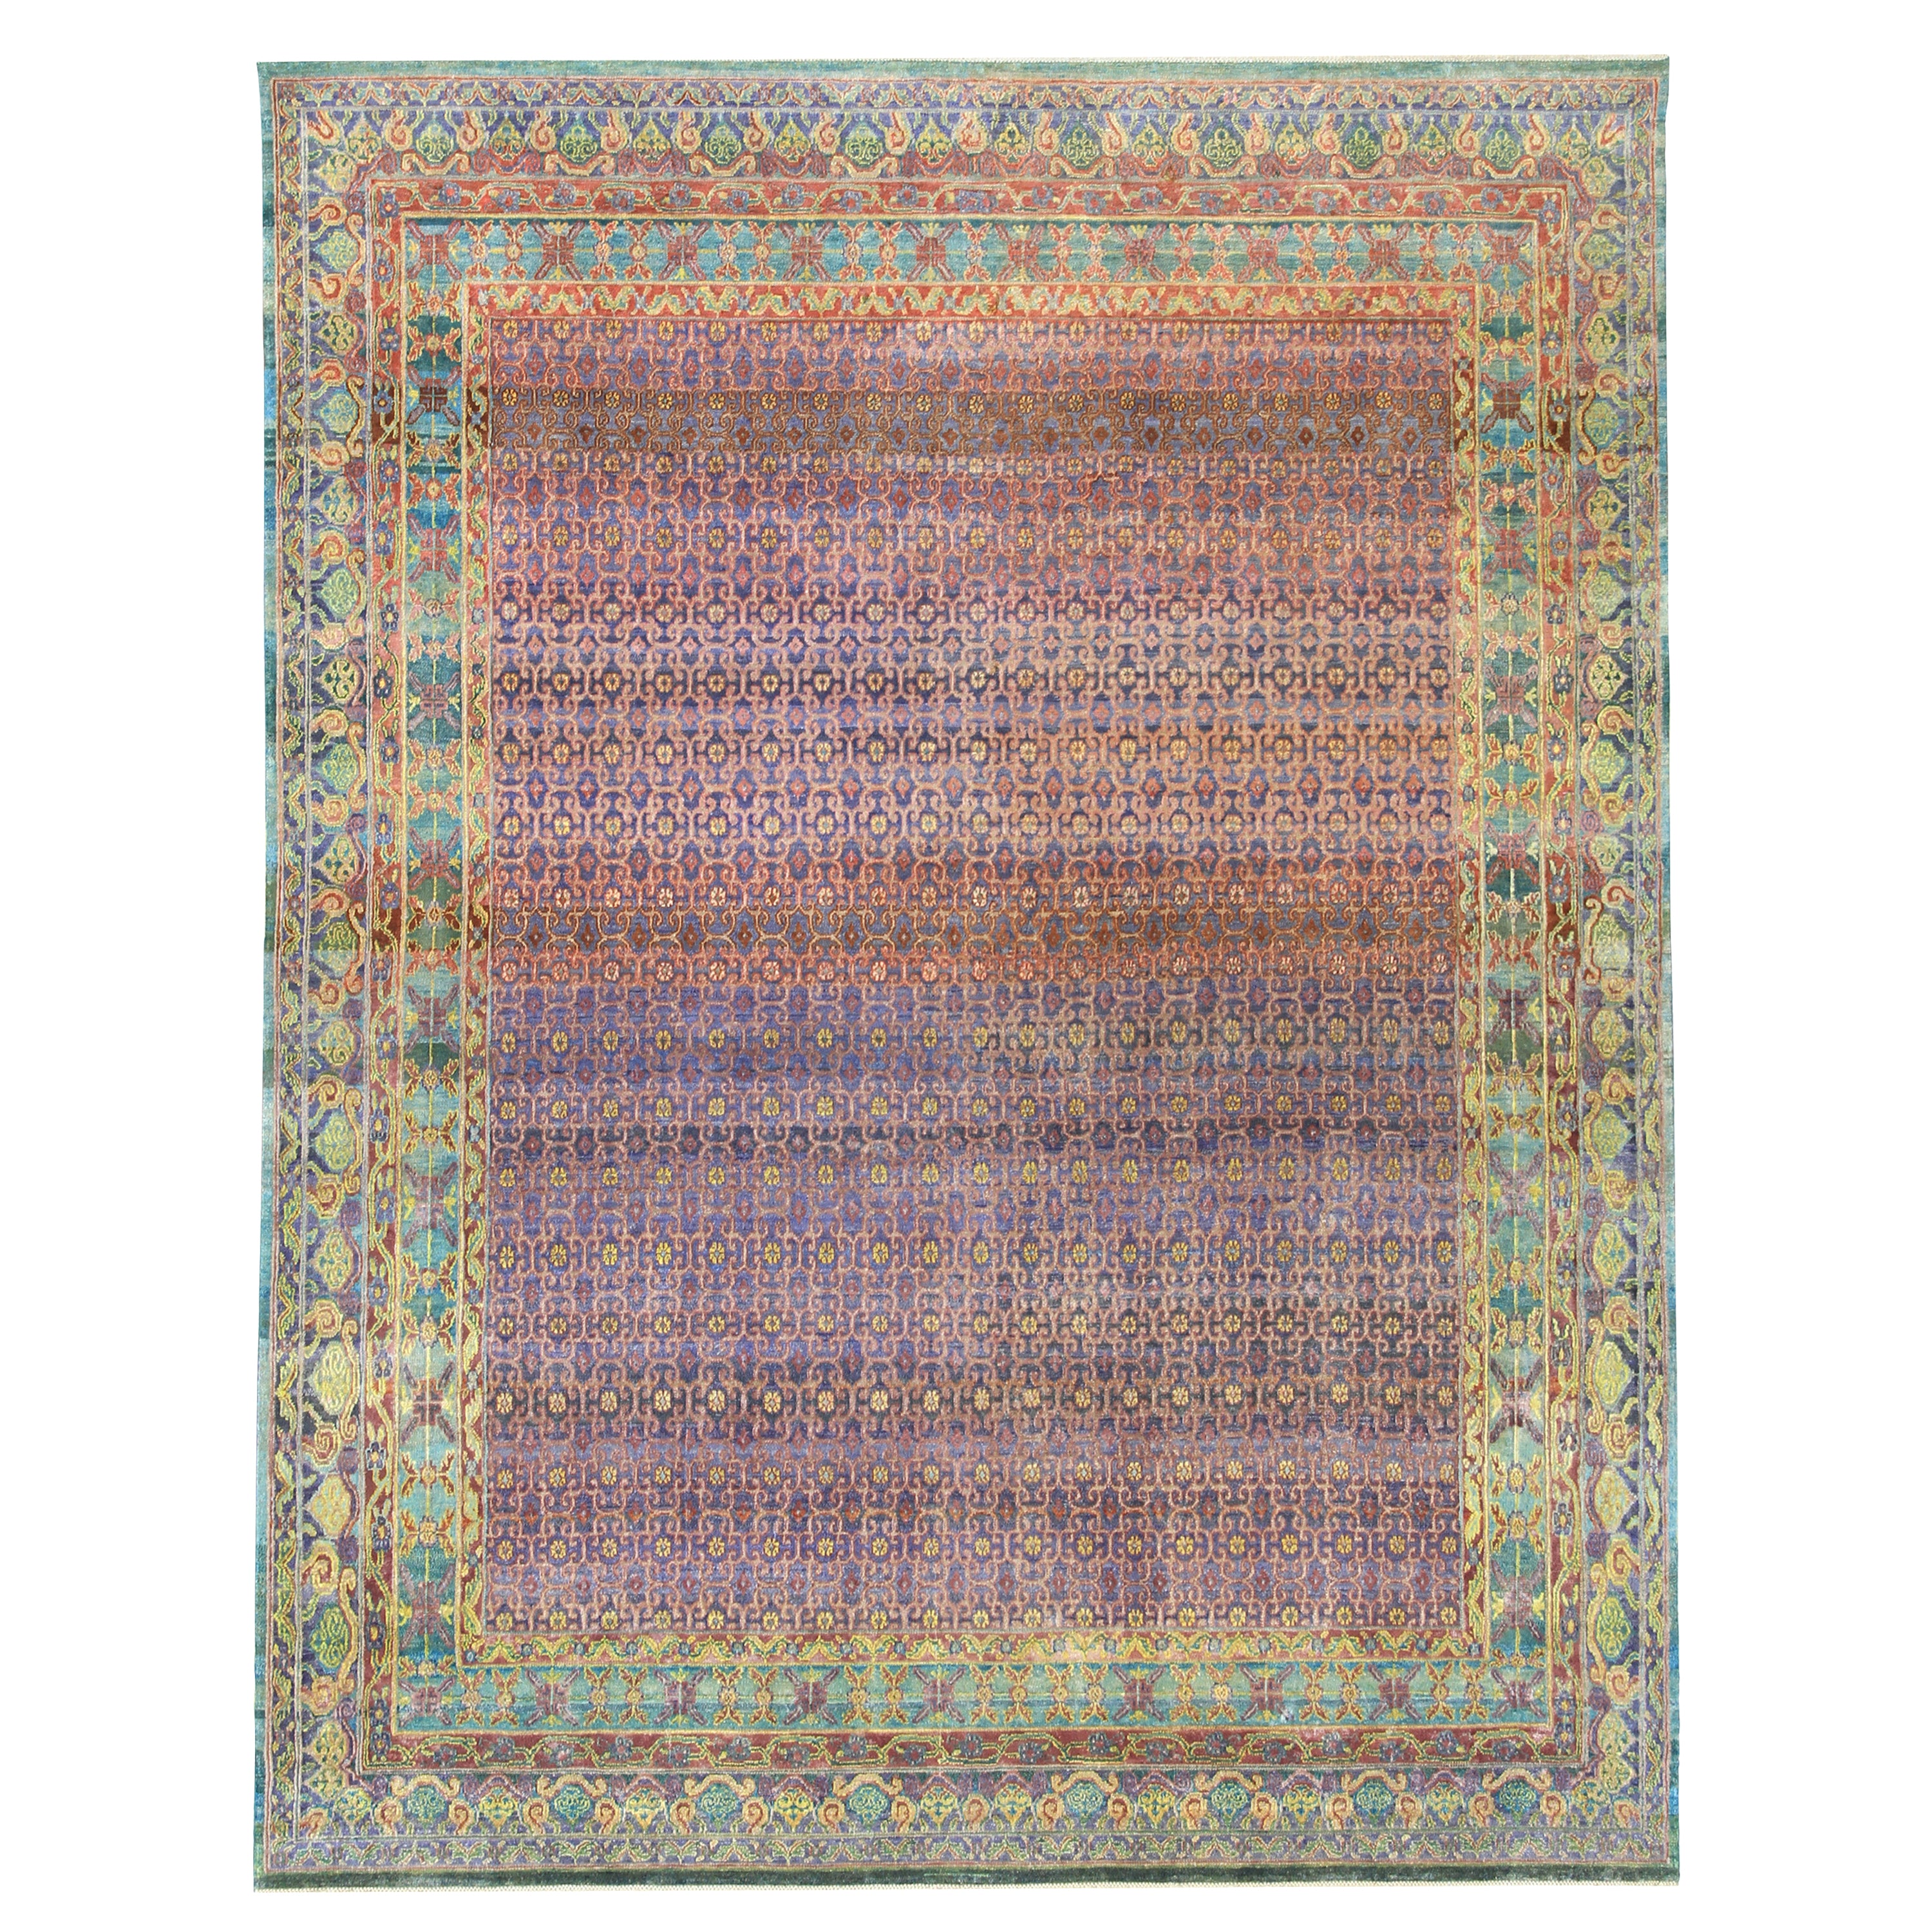 Multicolored Transitional Wool Silk Blend Rug - 8' x 10'6" Default Title